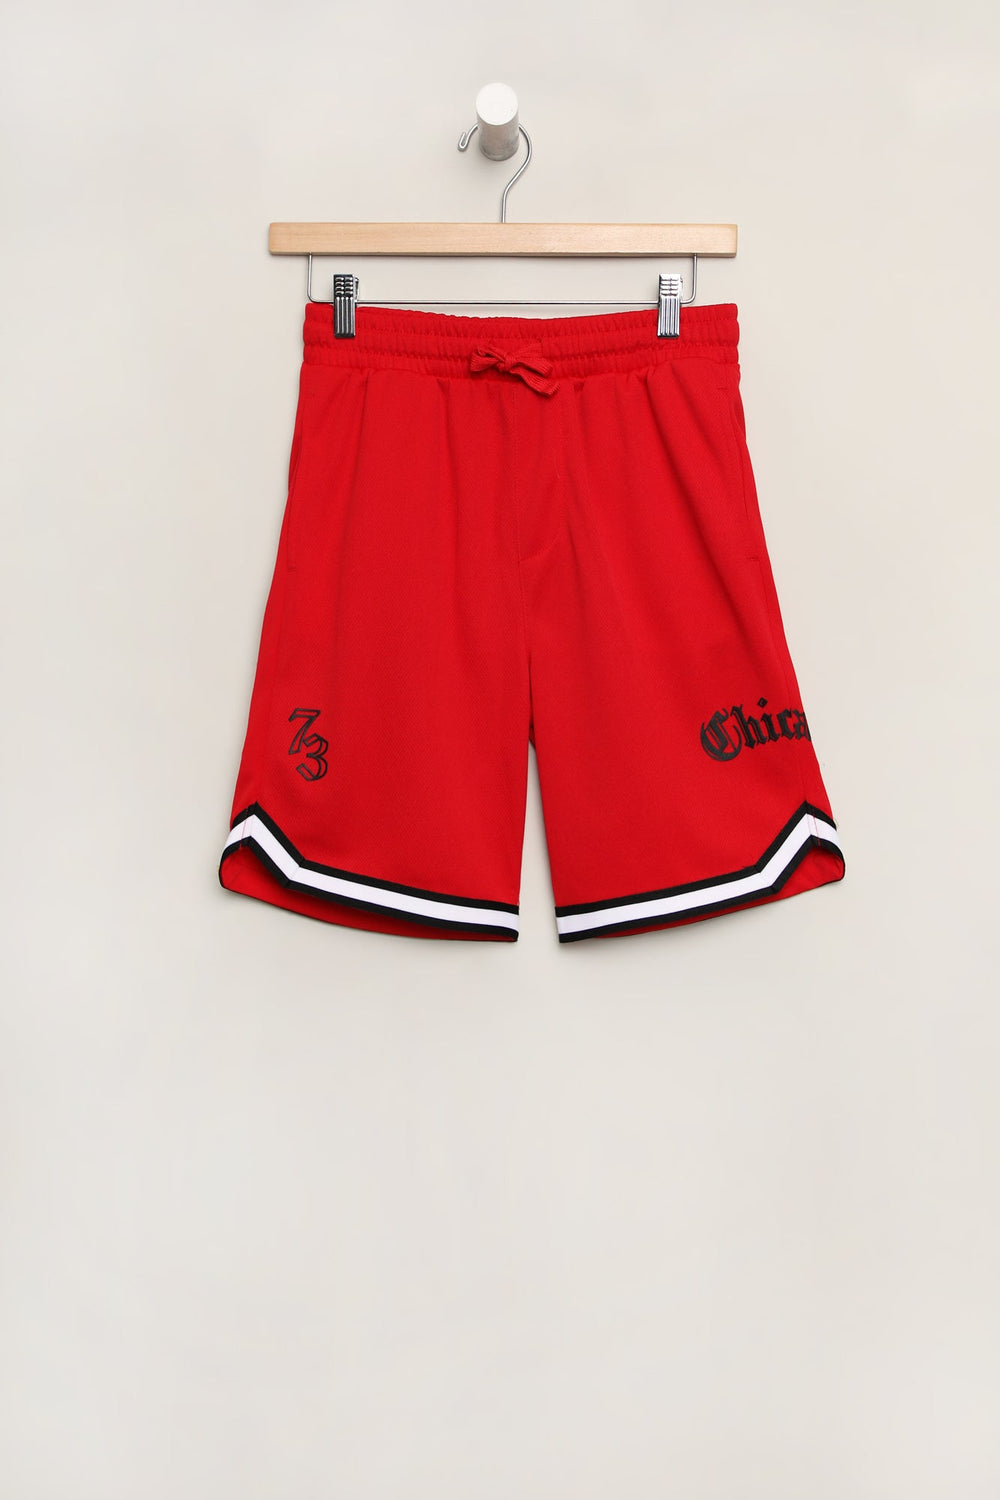 West49 Youth Chicago Mesh Shorts West49 Youth Chicago Mesh Shorts